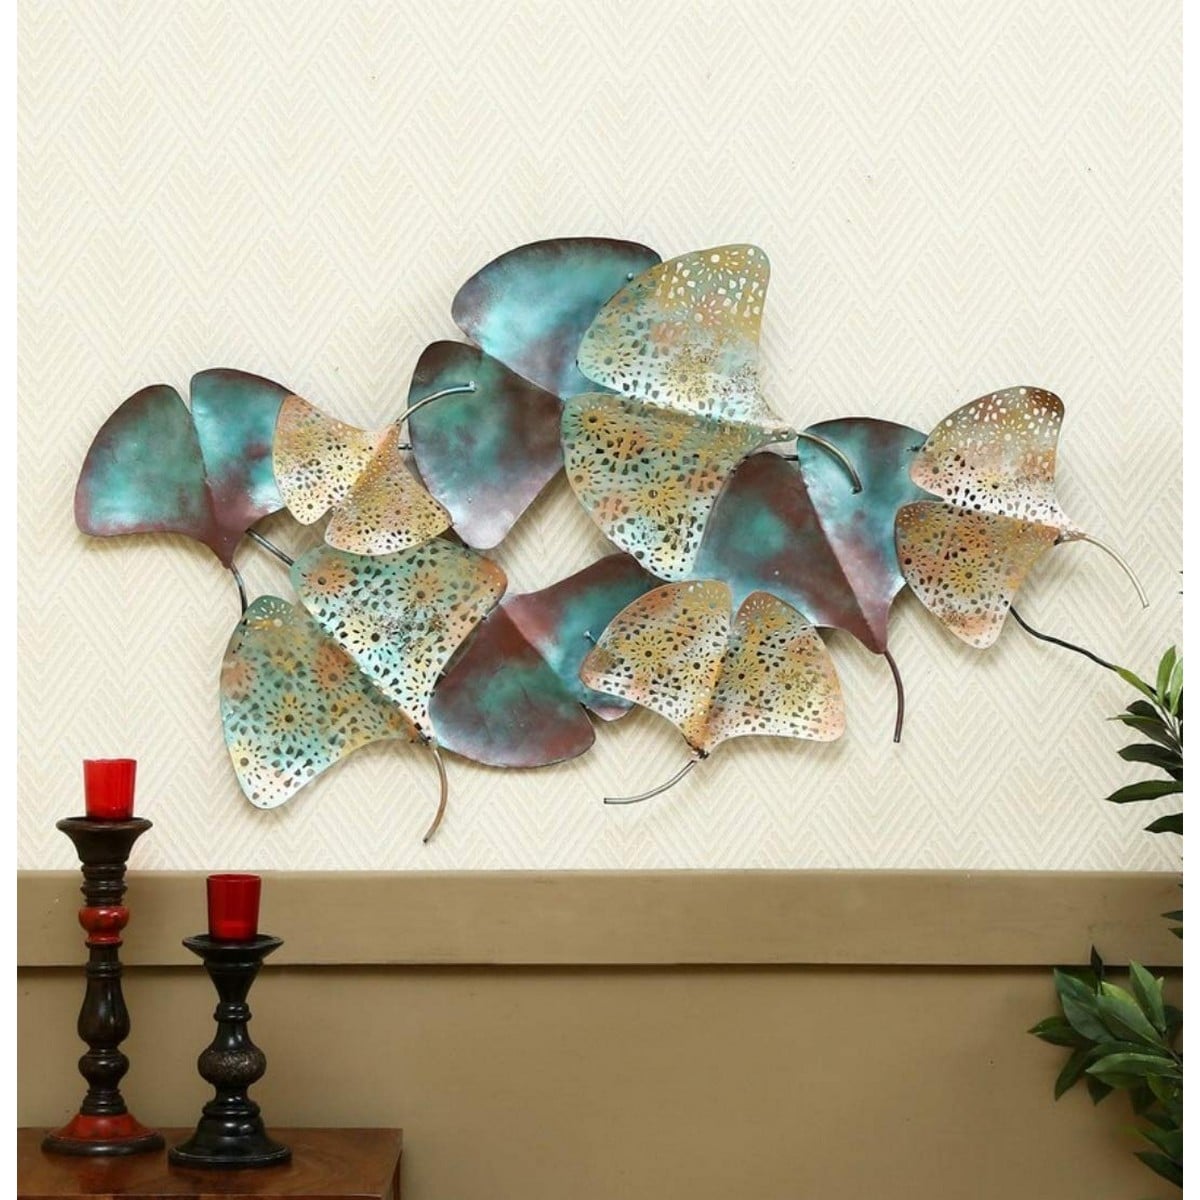 Zingo Leaf in Attractive Pattern with Light for Wall Decor  